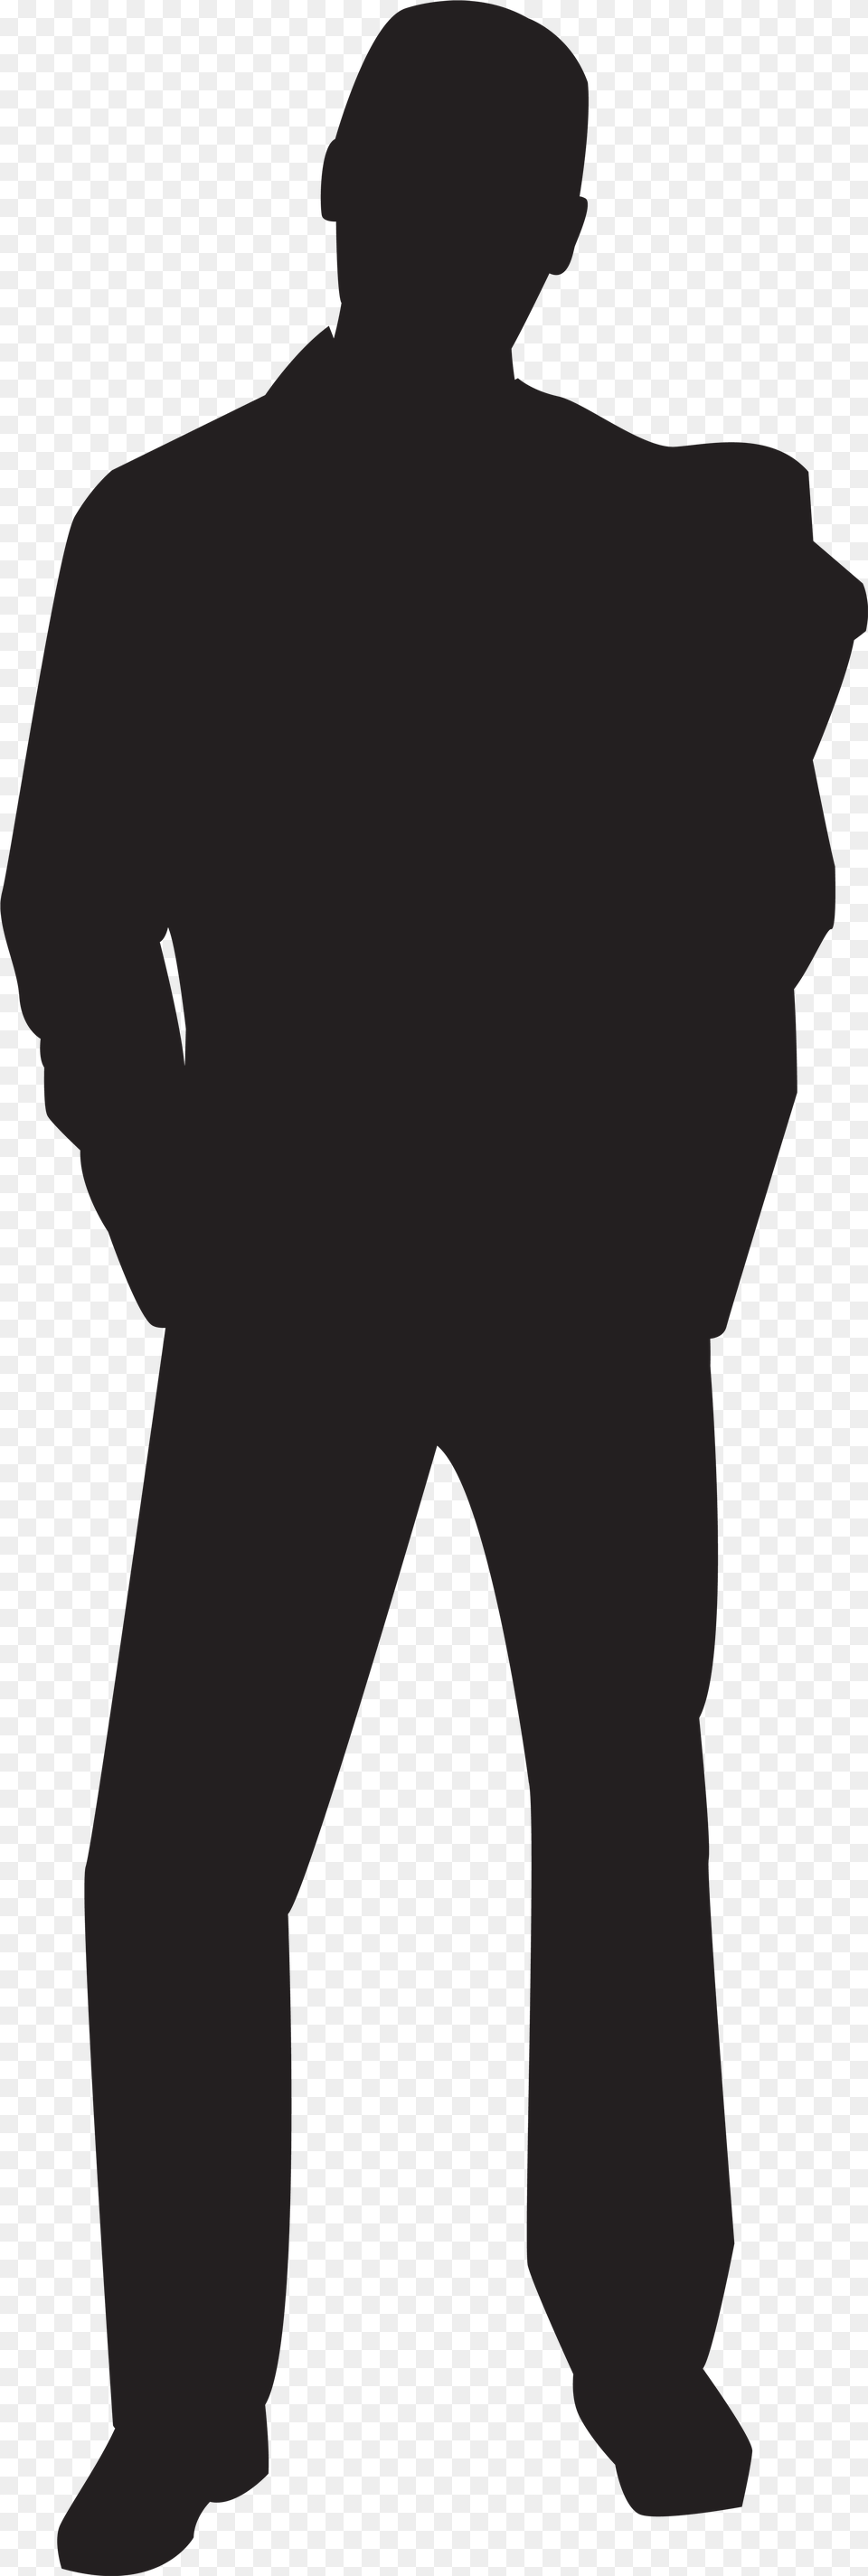 Man Silhouette Clip Artu200b Gallery Yopriceville Man Silhouette, Adult, Male, Person, Clothing Png